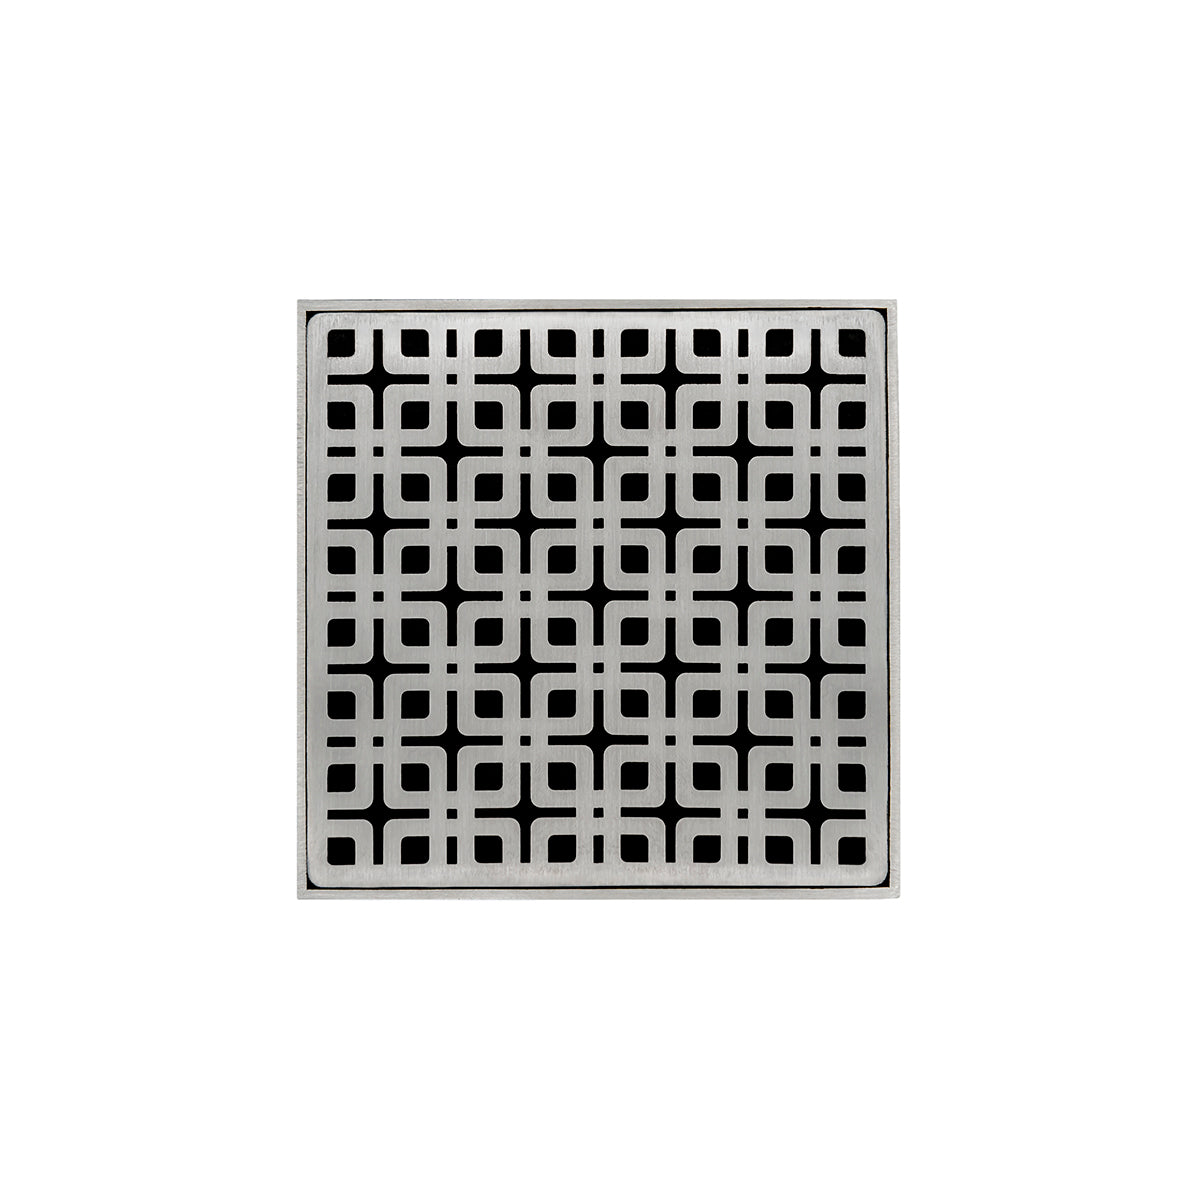 Infinity Drain 5" x 5" KDB 5 Premium Center Drain Kit with Link Pattern Decorative Plate with Stainless Steel Bonded Flange Drain Body, 2" No Hub Outlet